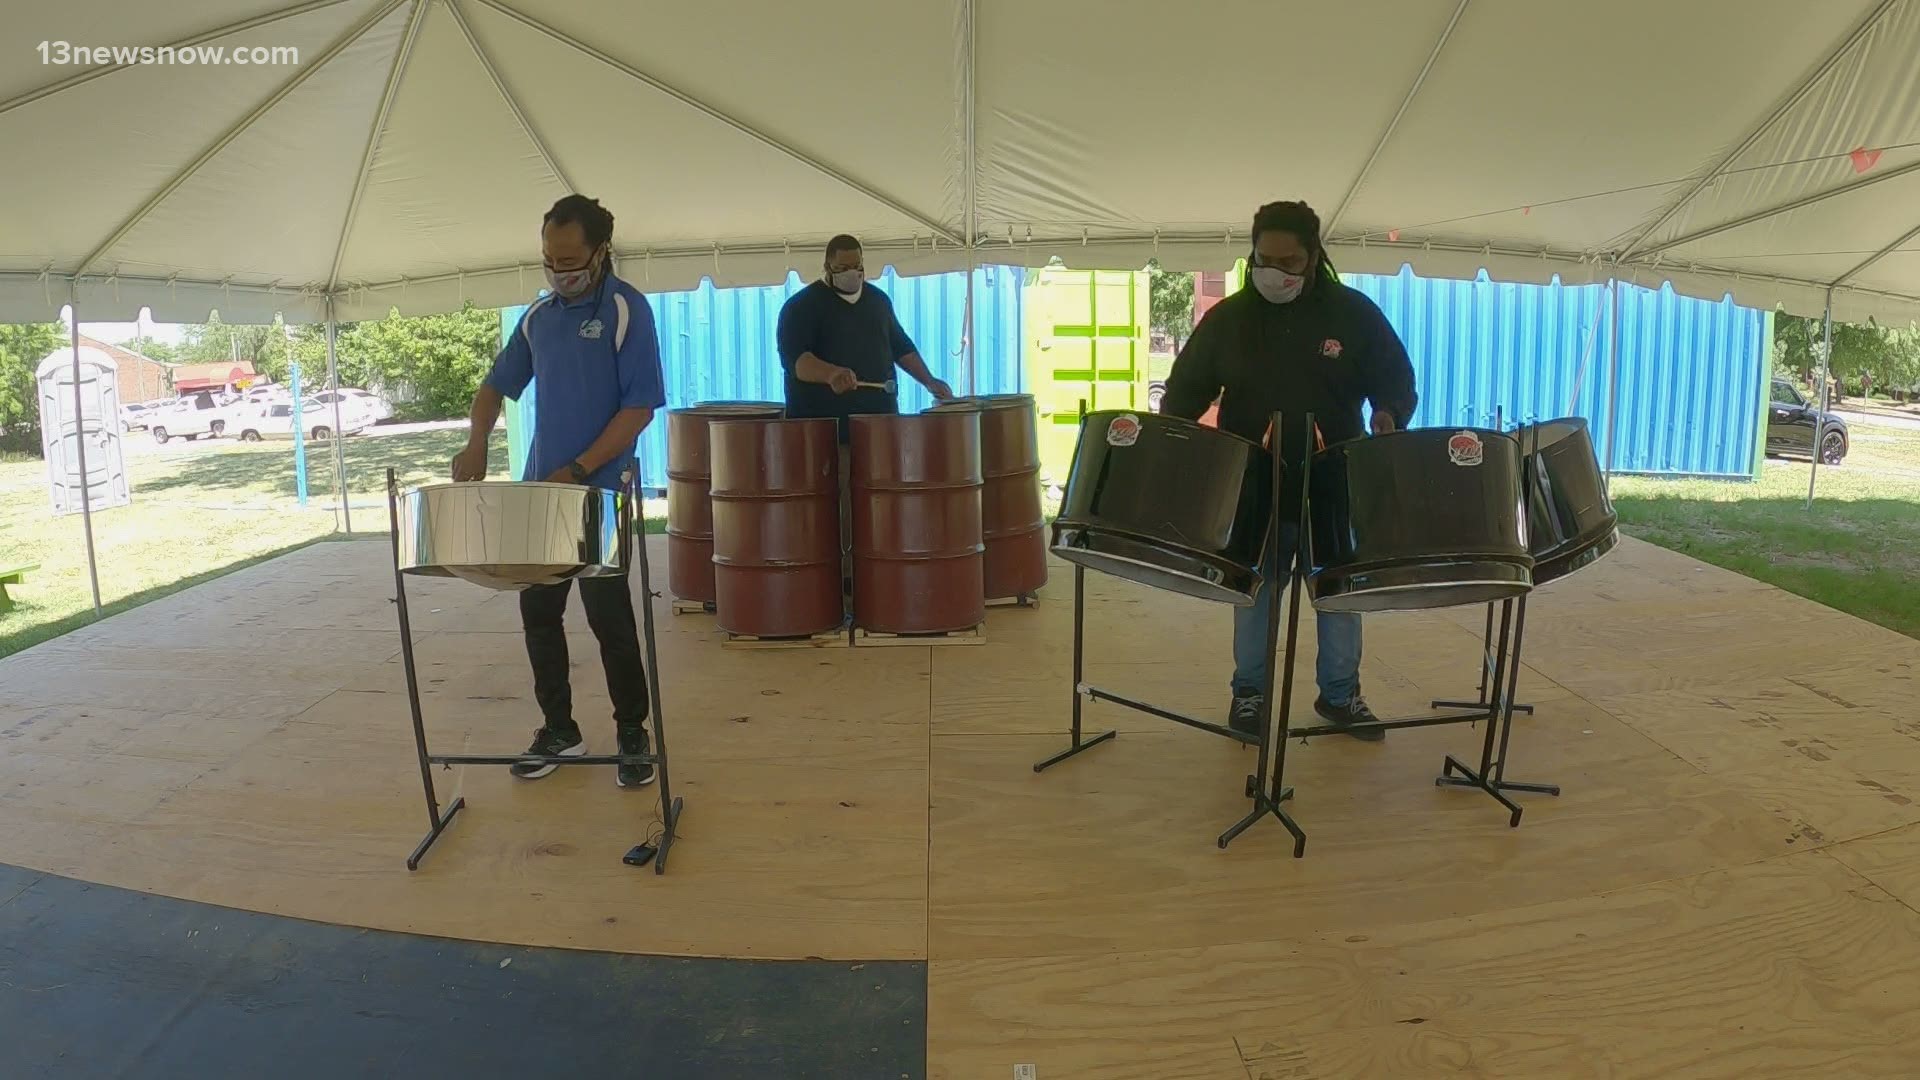 The goal of the non-profit is to provide no-fee out-of-school time steelpan ensembles.